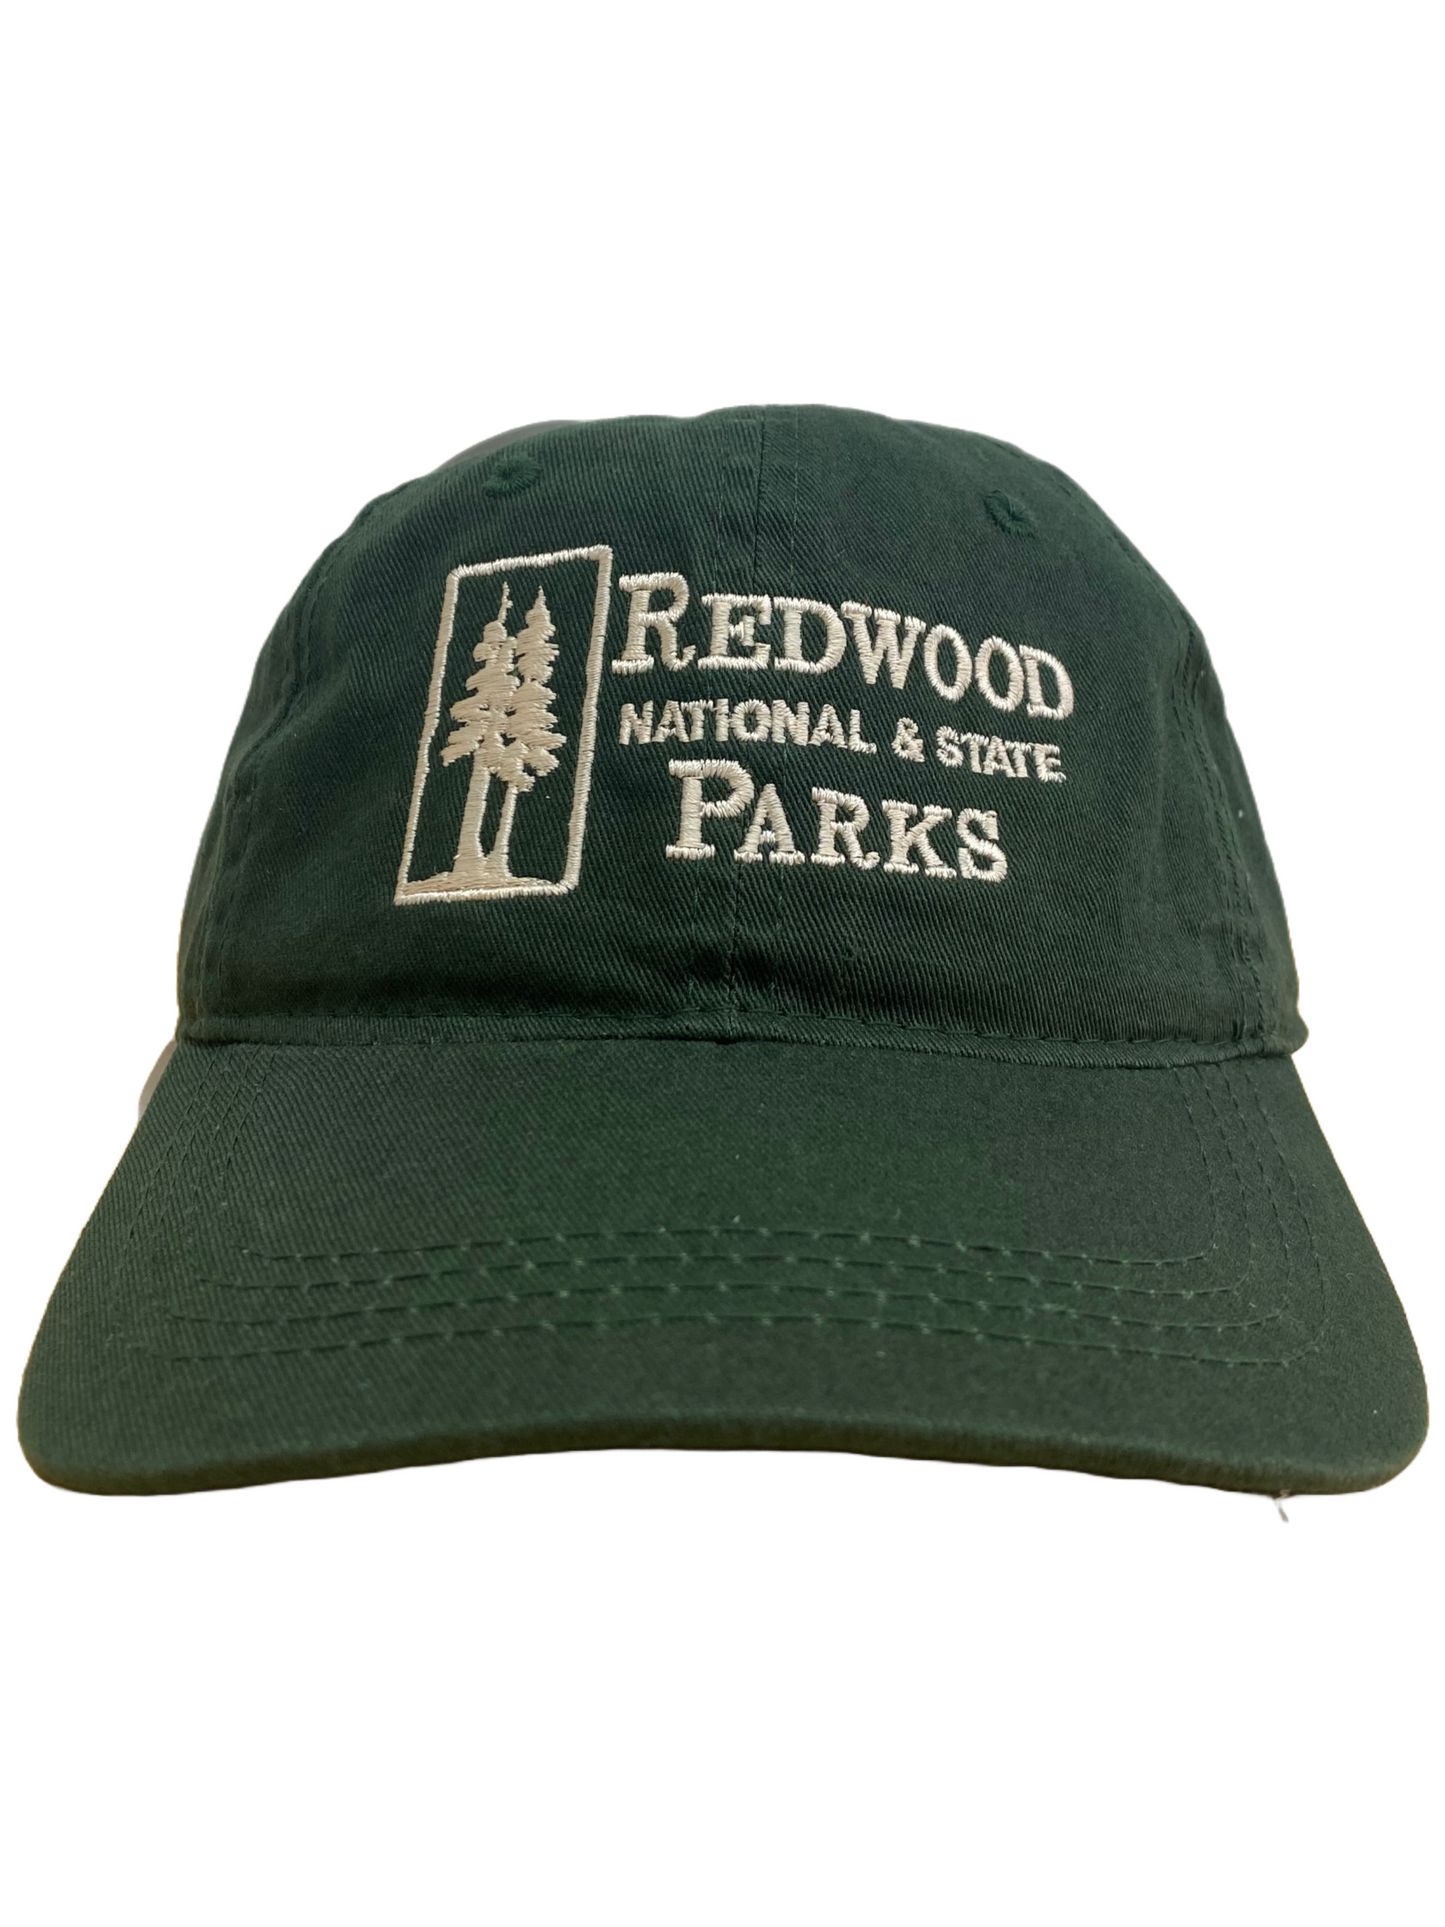 Redwood National & State Parks Forest Green Cap